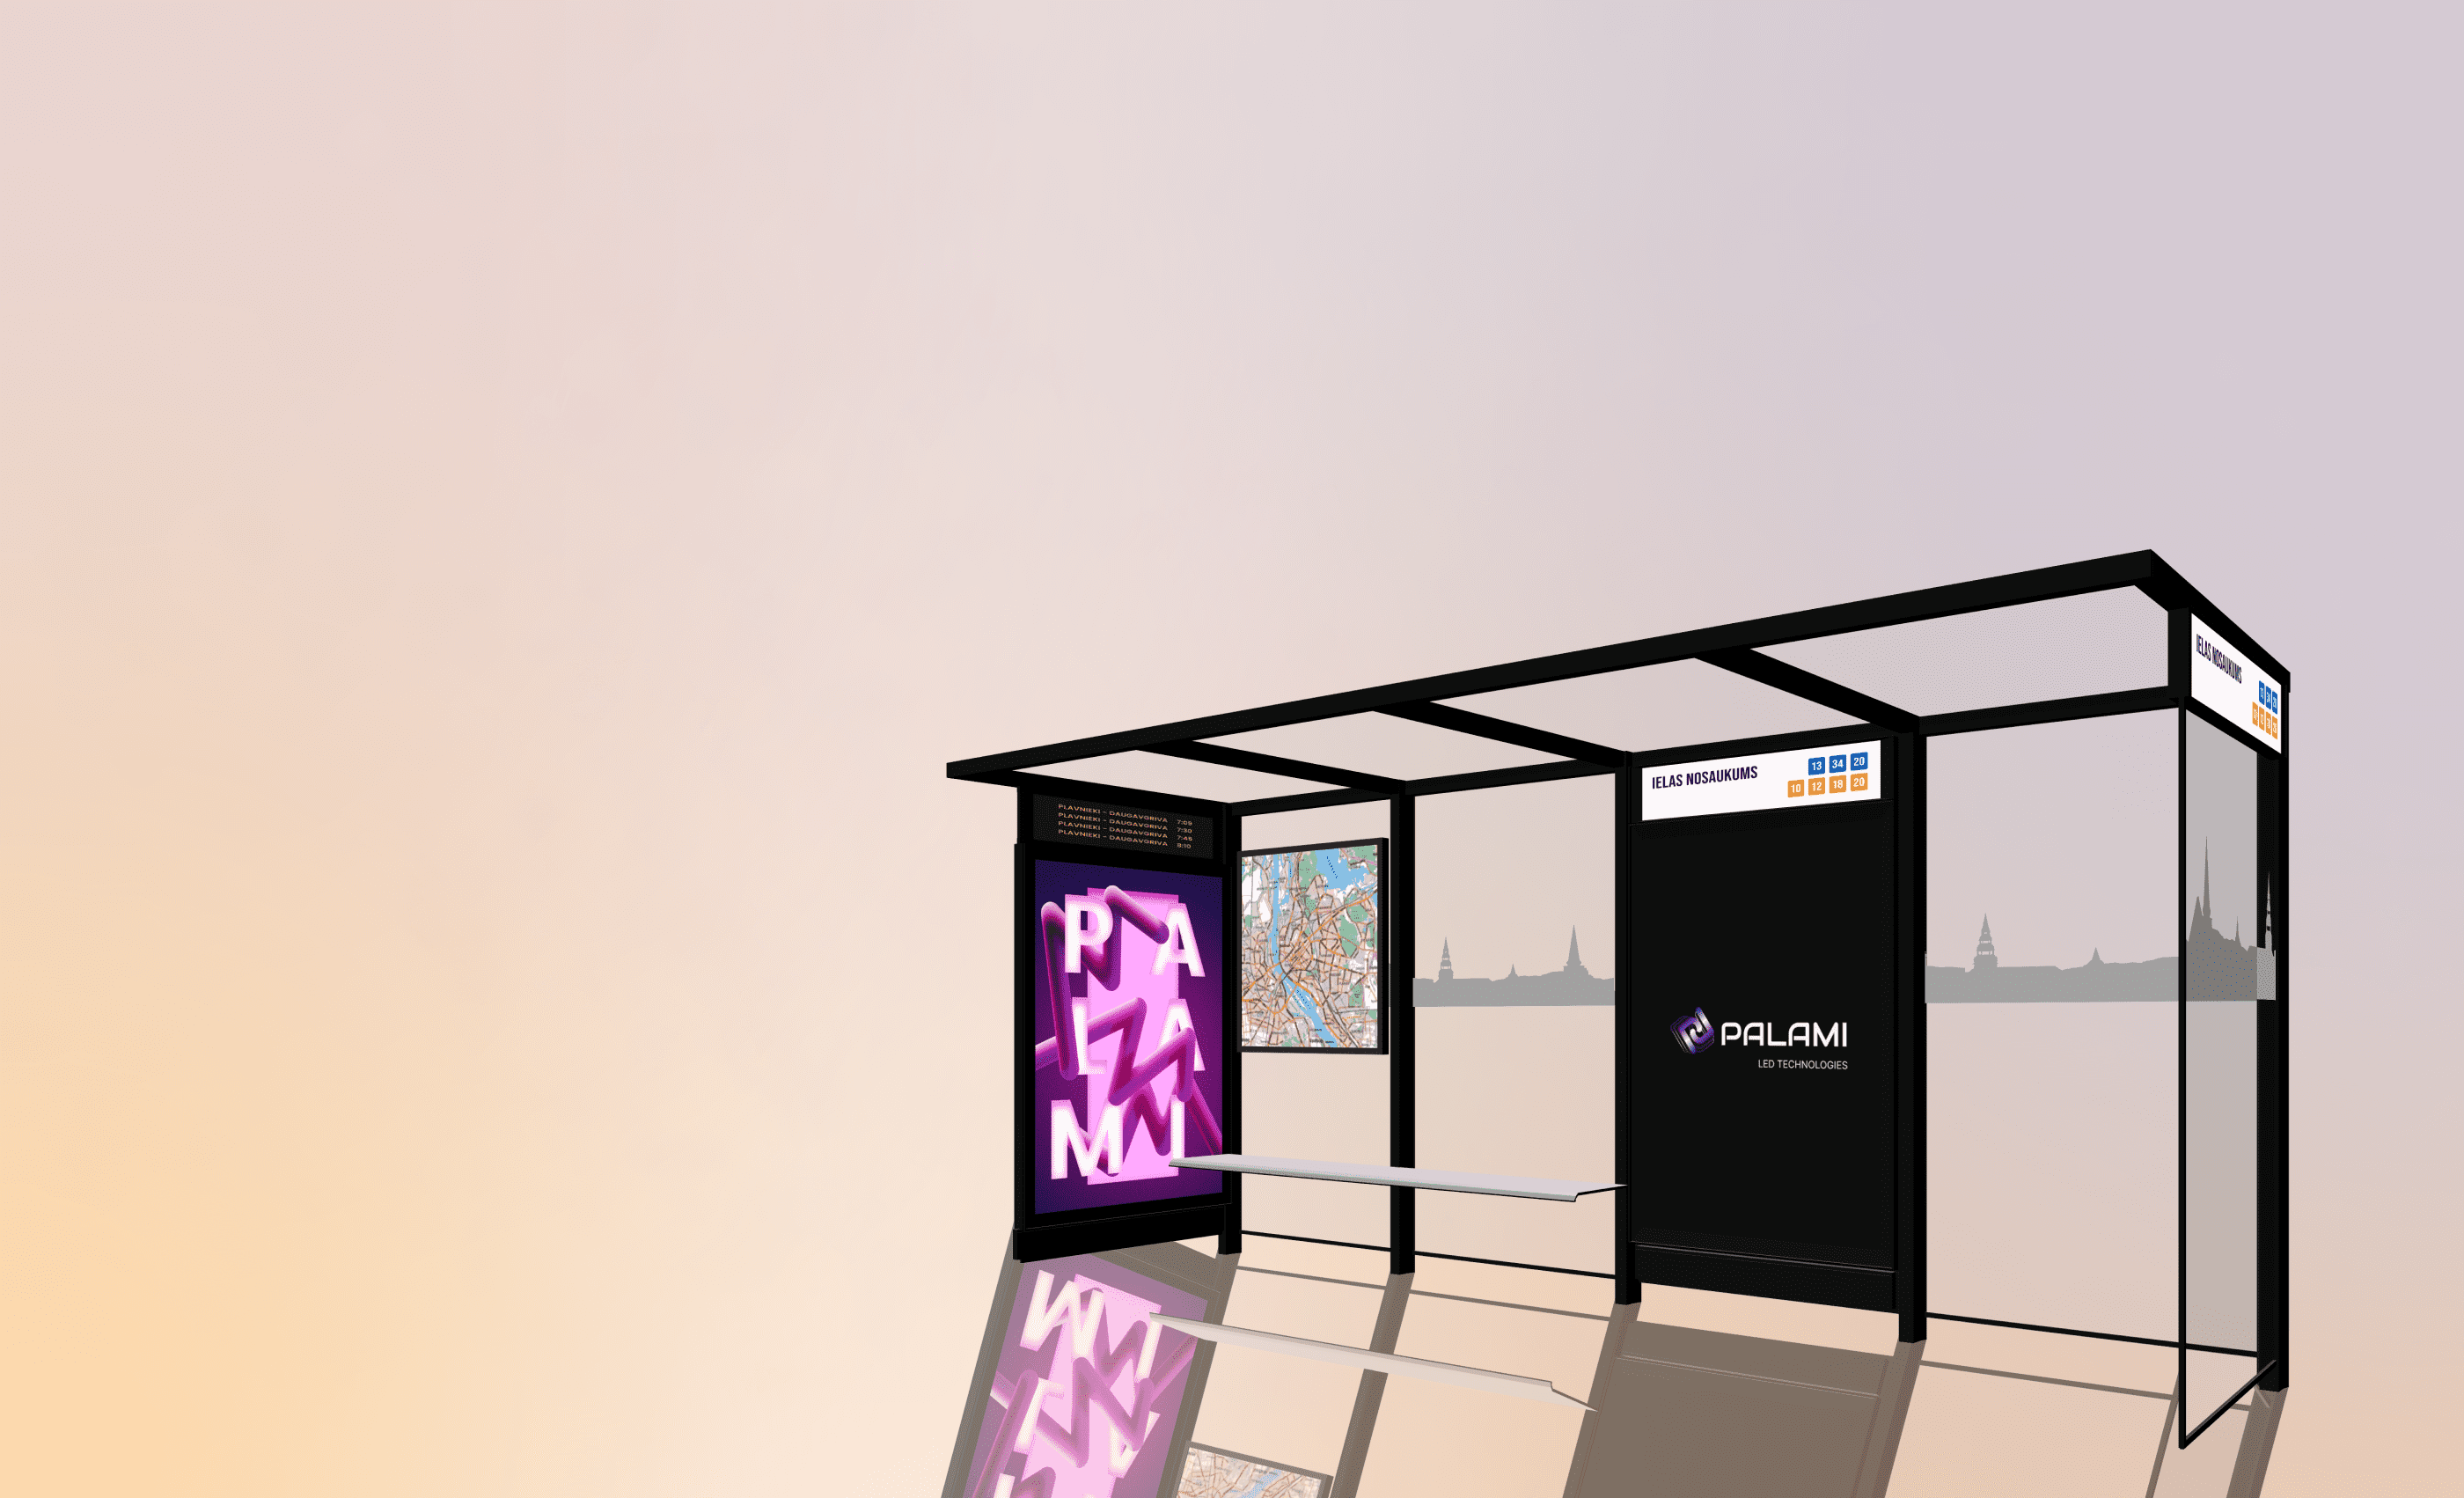 Creative LED Display Technology Integrated In Bus Stop Shelter By PALAMI Group